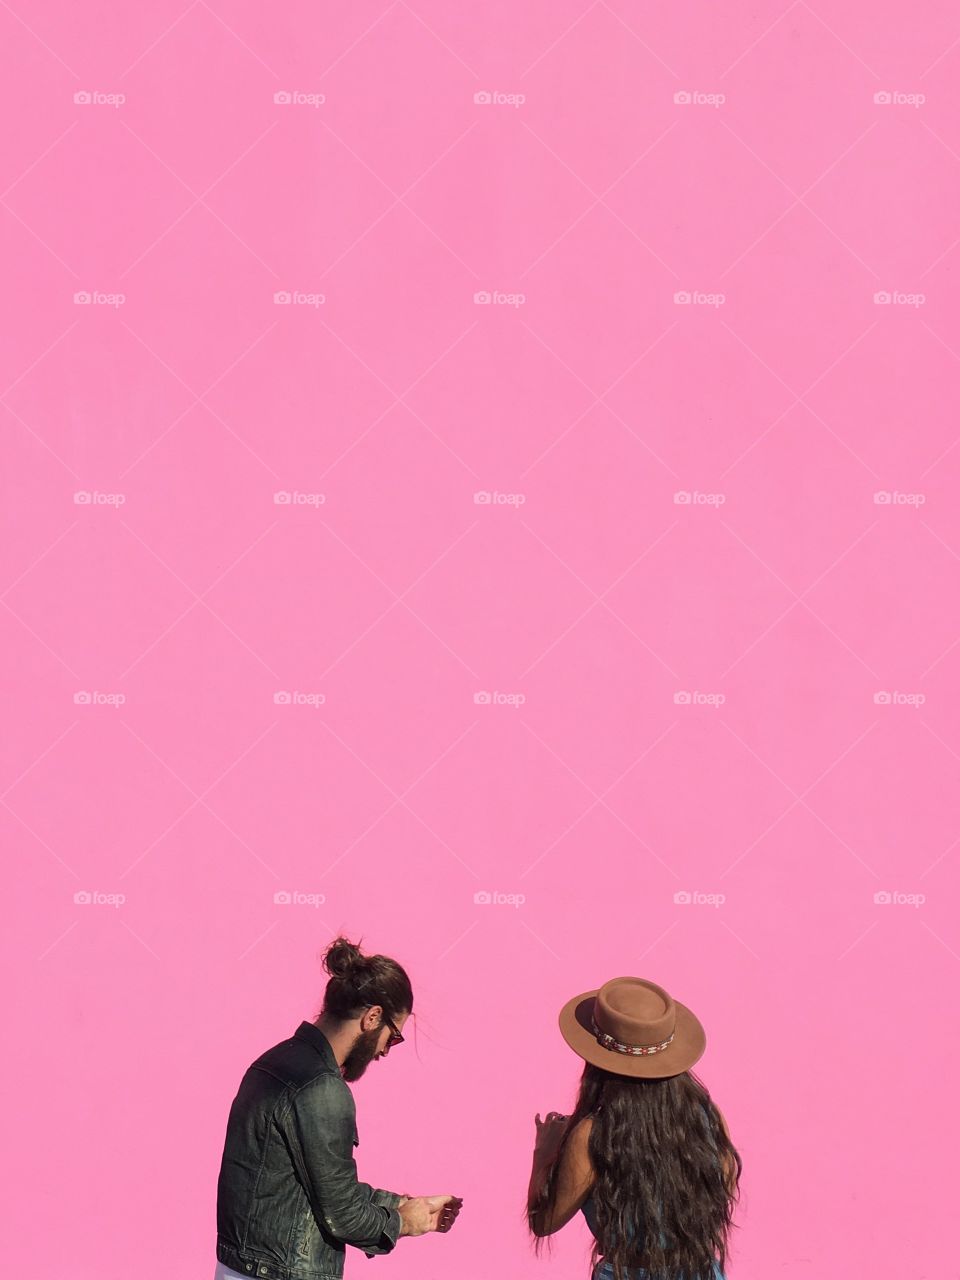 Two people and a pink wall.